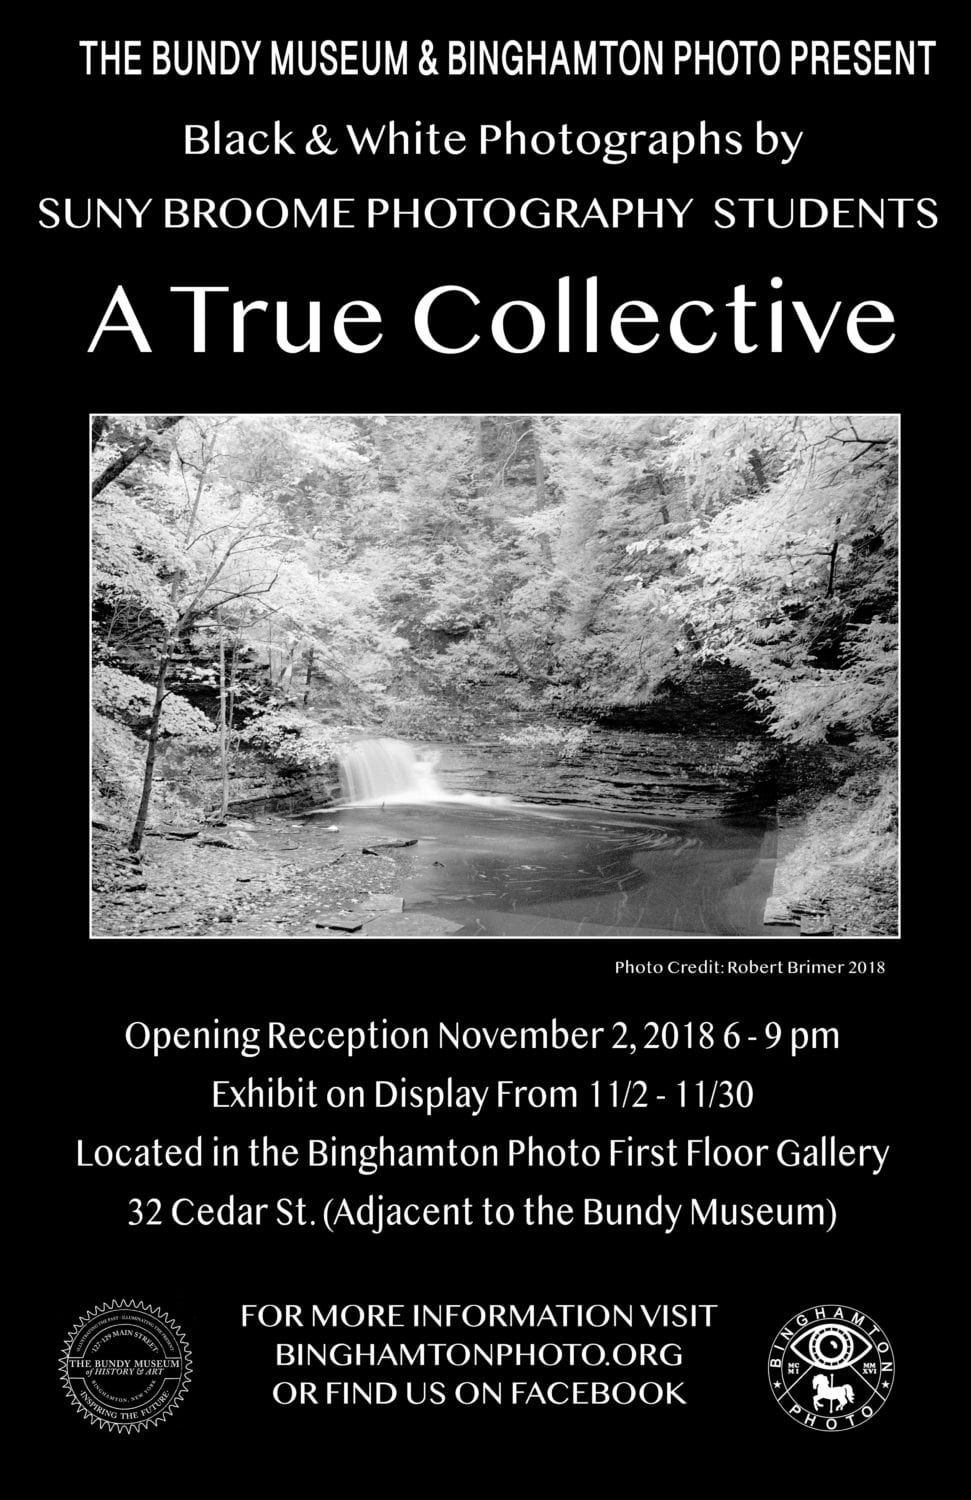 SUNY Broome Photography Reception at Bundy Museum on Nov. 2